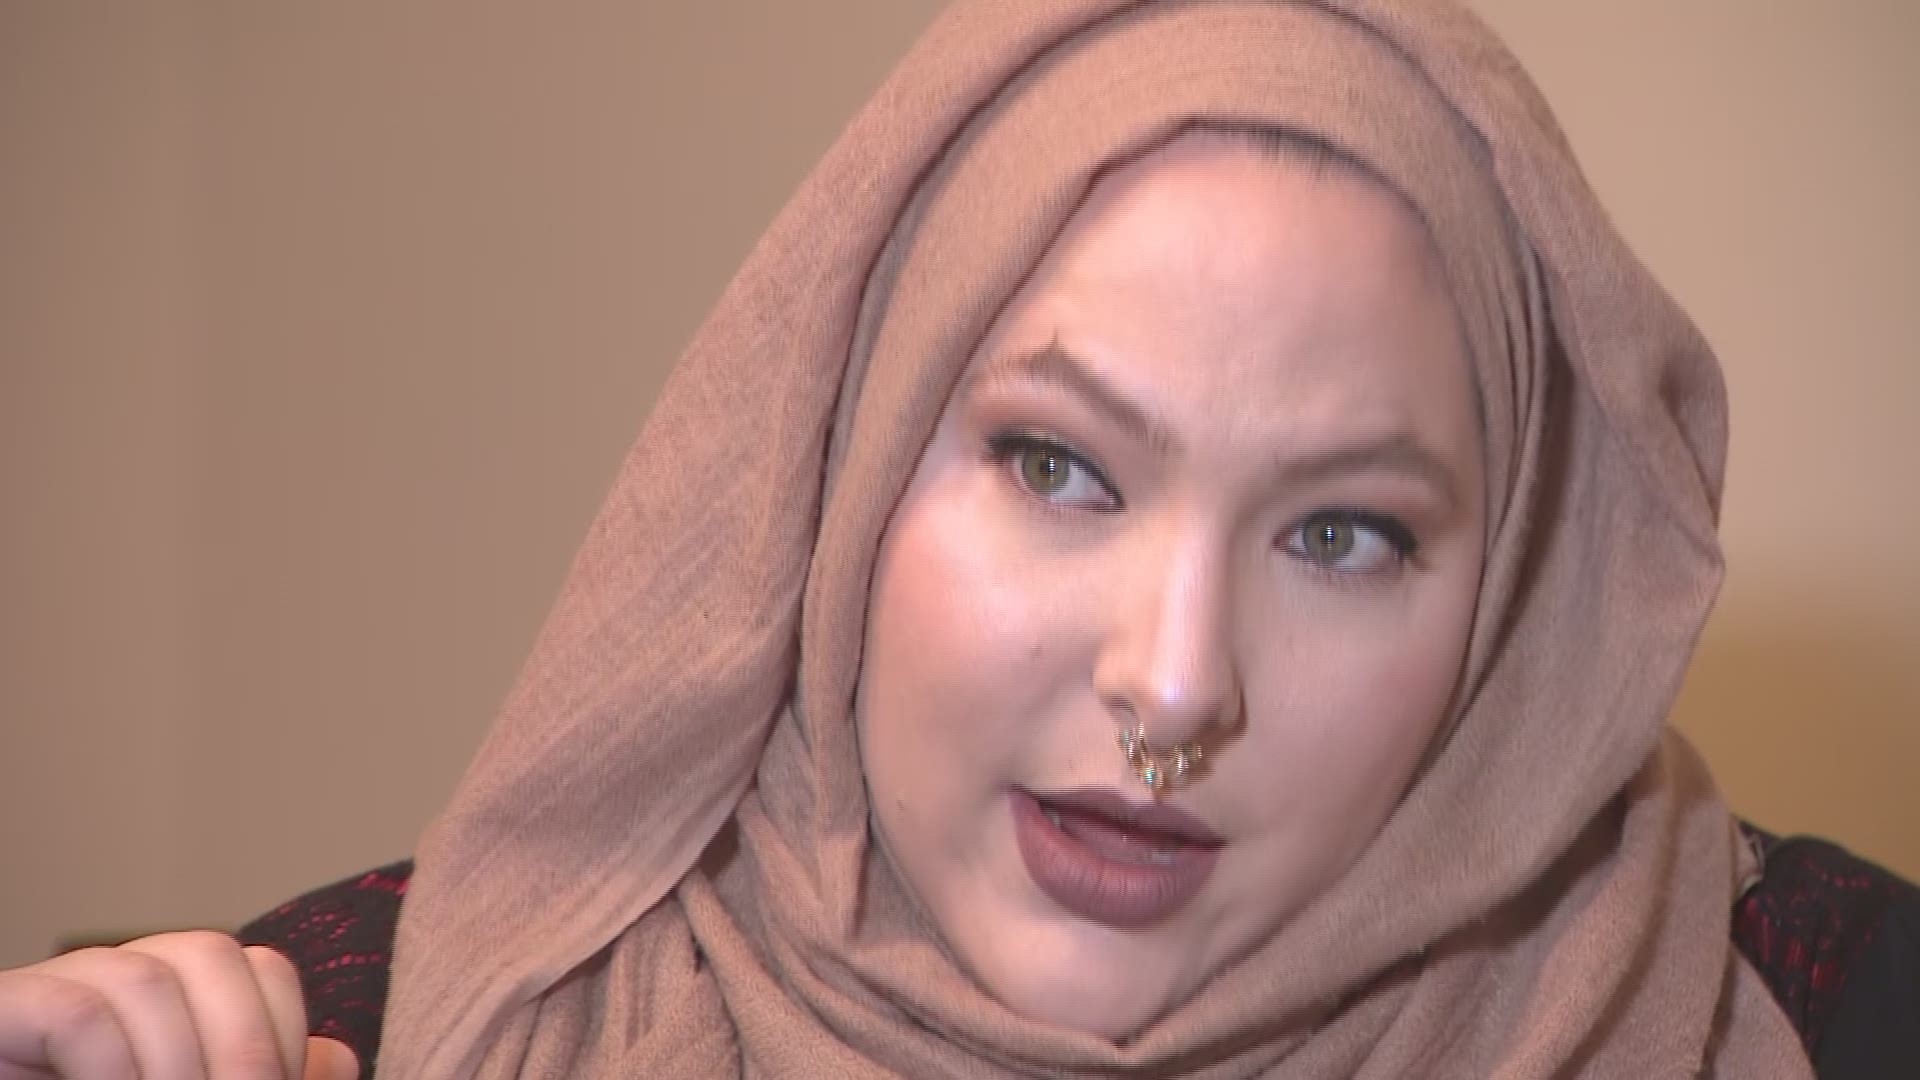 A Muslim woman is speaking out after she says she was attacked because of her religion.